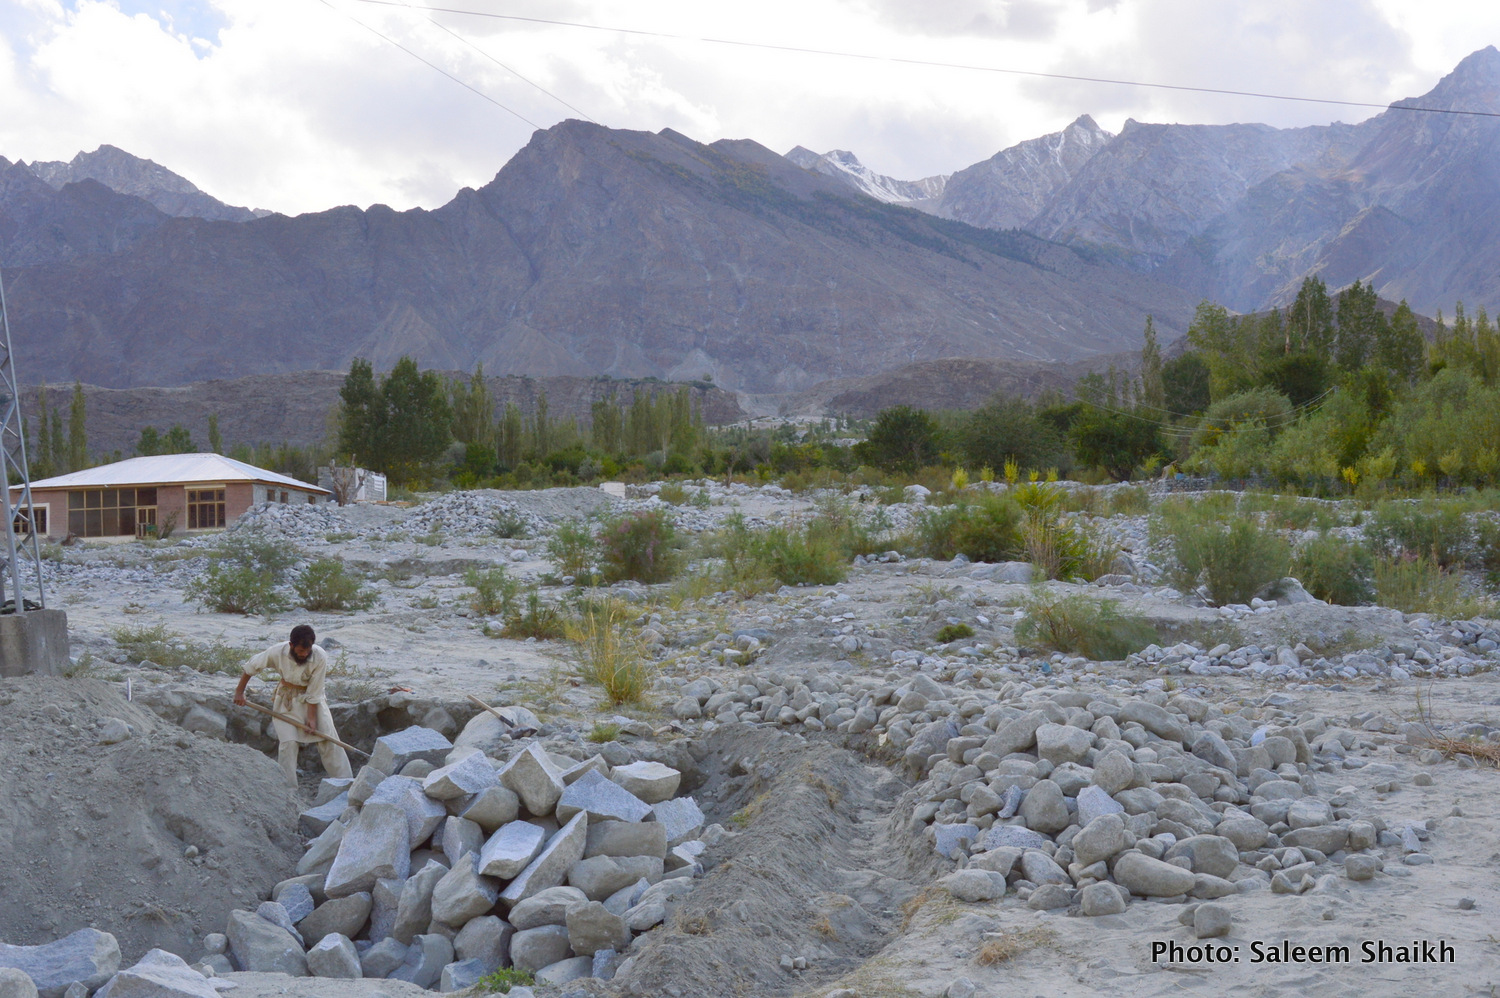 A farmer struggles to reclaim his field by spading away silt deposited on his field in flood-prone Damaas village in picturesque valley of Gizer district, Pakistan’s north. Traditionally, the village is located in non-flood area. But three floods have hit it in 2006, 2010 and 2015, respectively, with 2010 flood being the most devastating. Photo credit: Saleem Shaikh